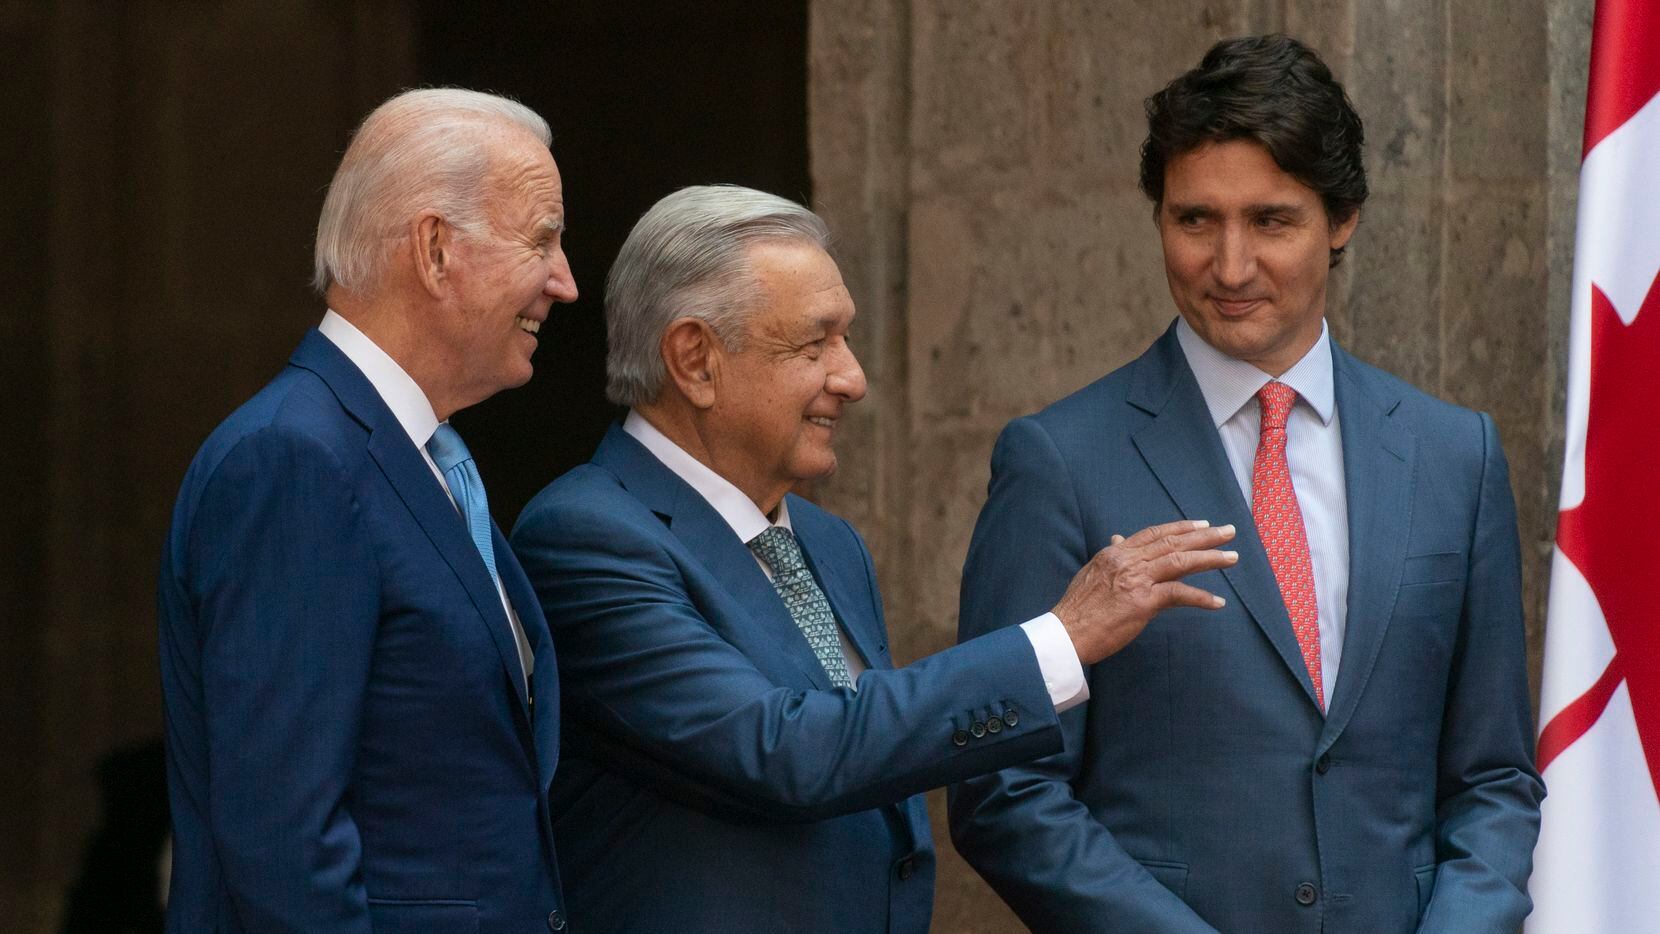 Biden, López Obrador and Trudeau push for stronger cooperation at Mexico summit